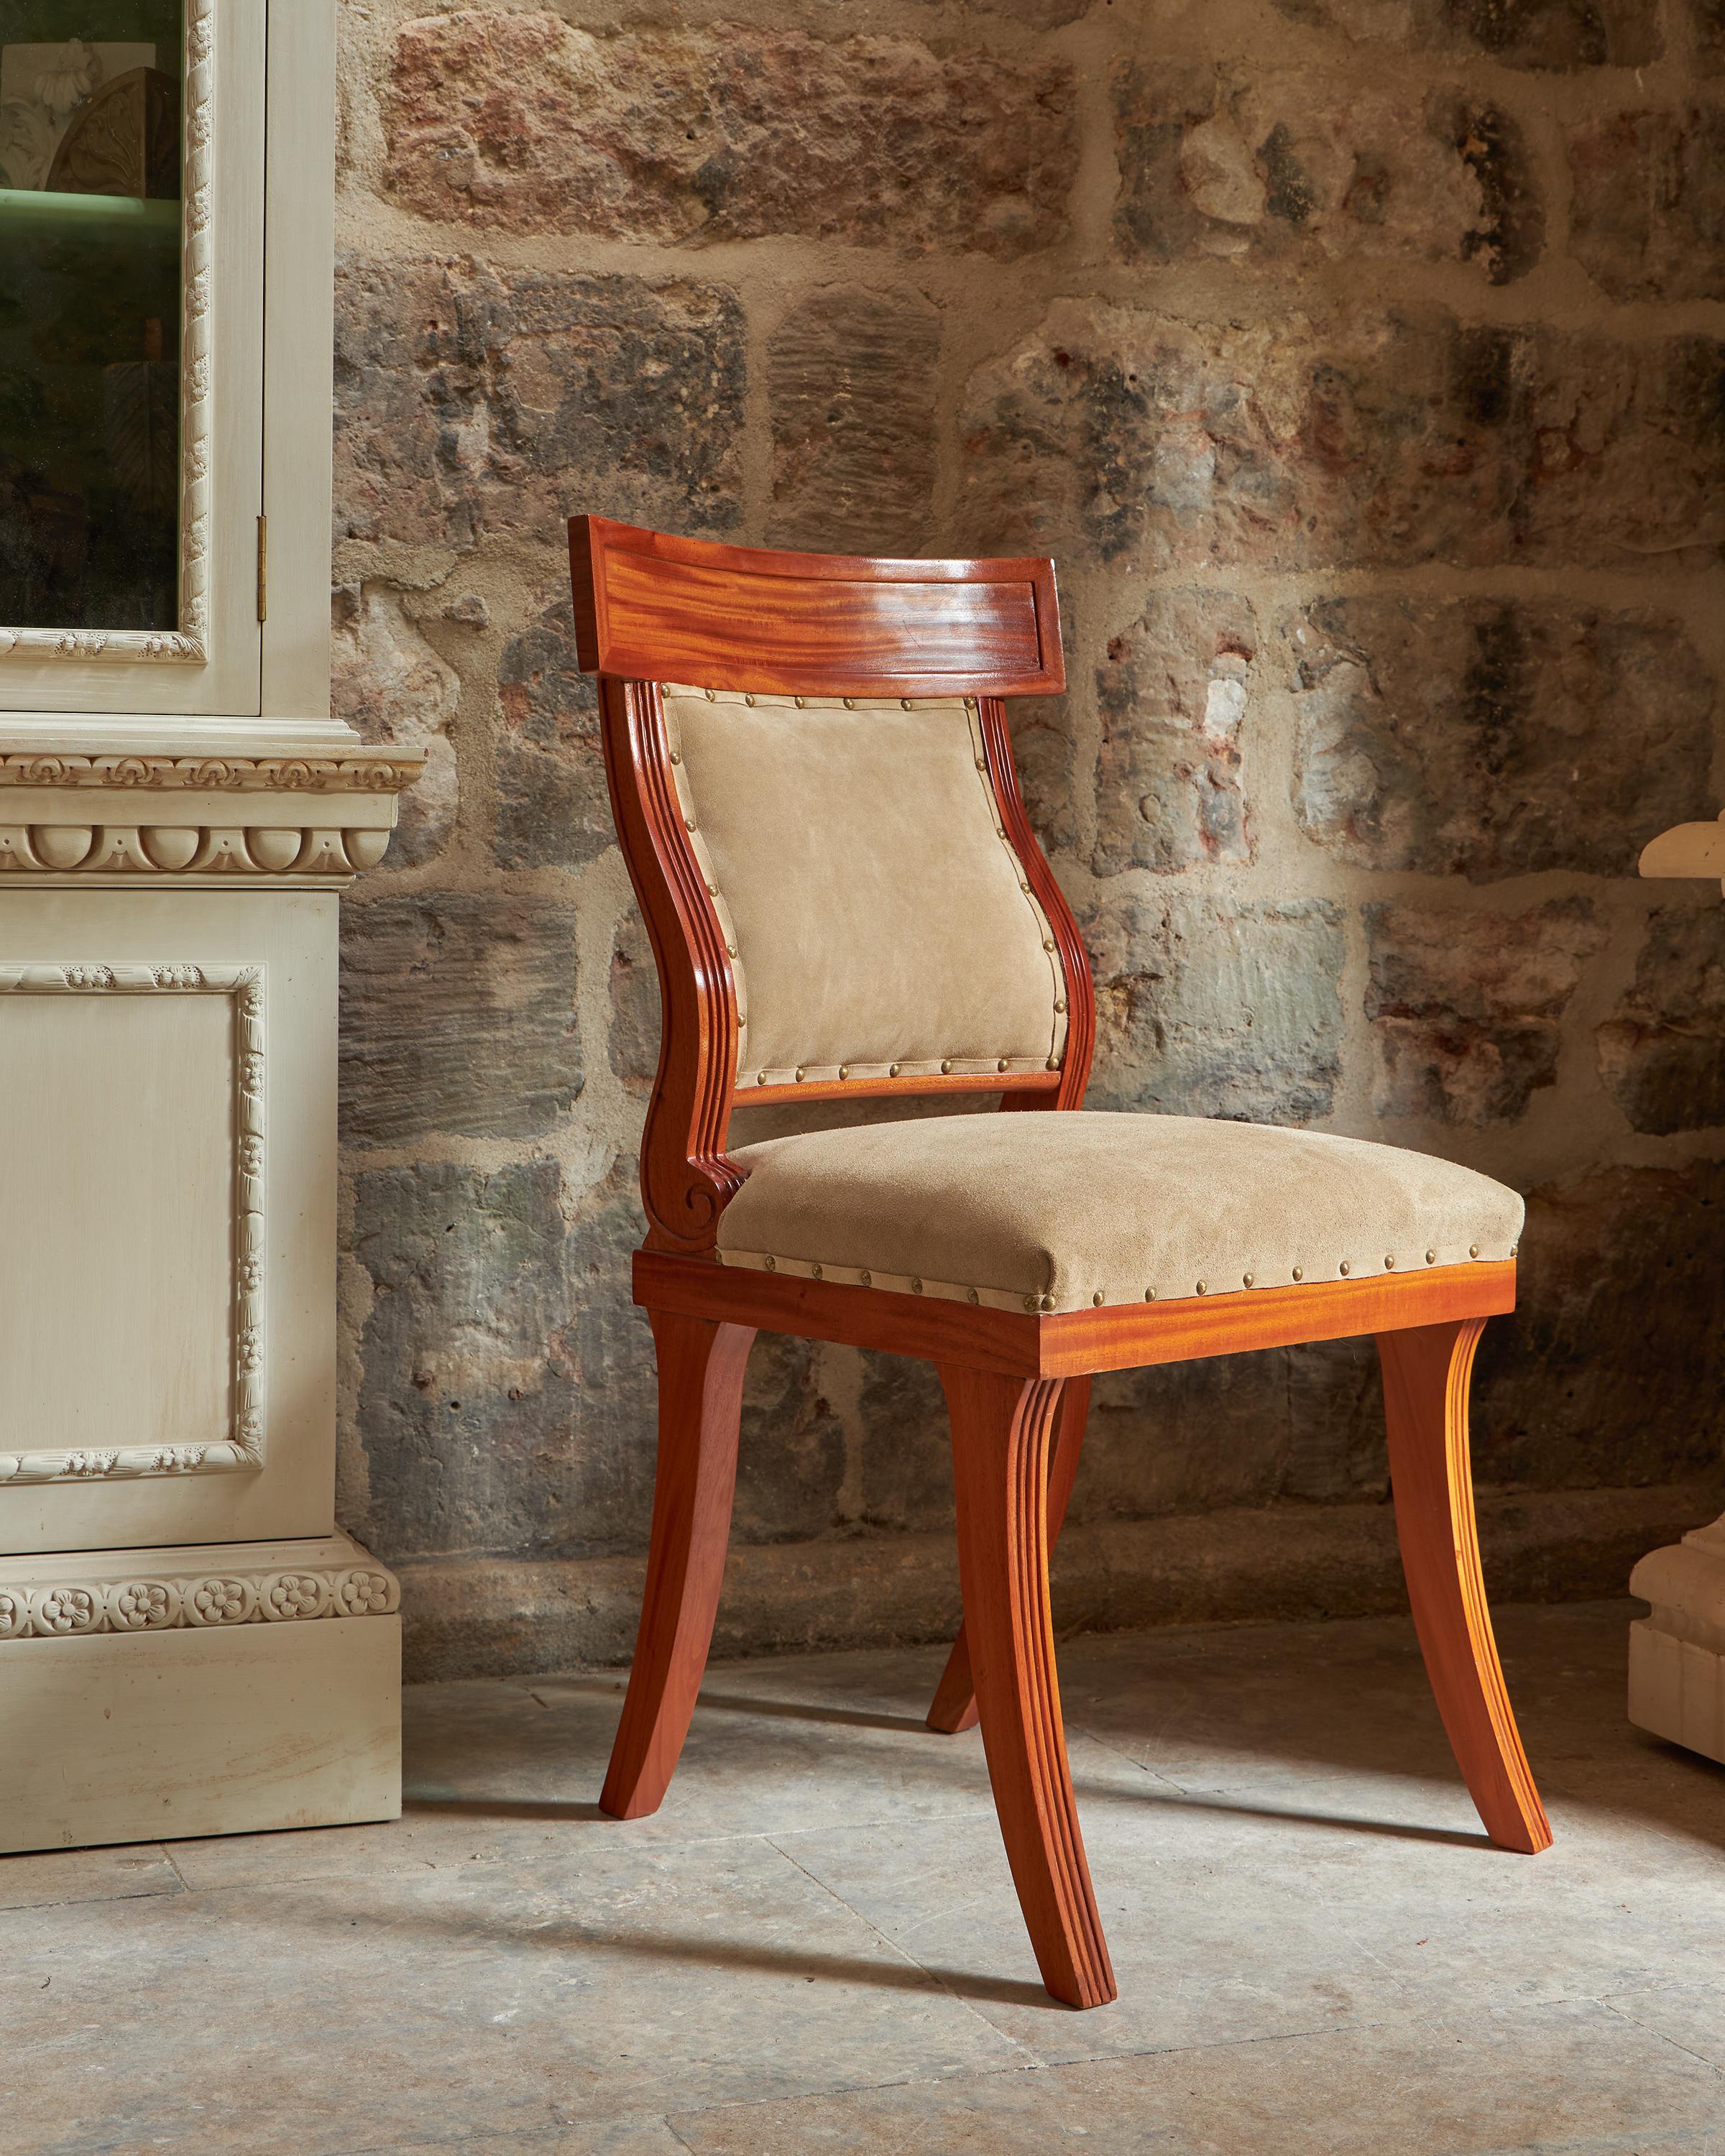 Taken from a design developed by the Greeks in the 5th century BC. The design was then resurrected in the English Regency period. The chair is made of Sono wood similar to rosewood. To be upholstered in the client’s own material. Bespoke finishing